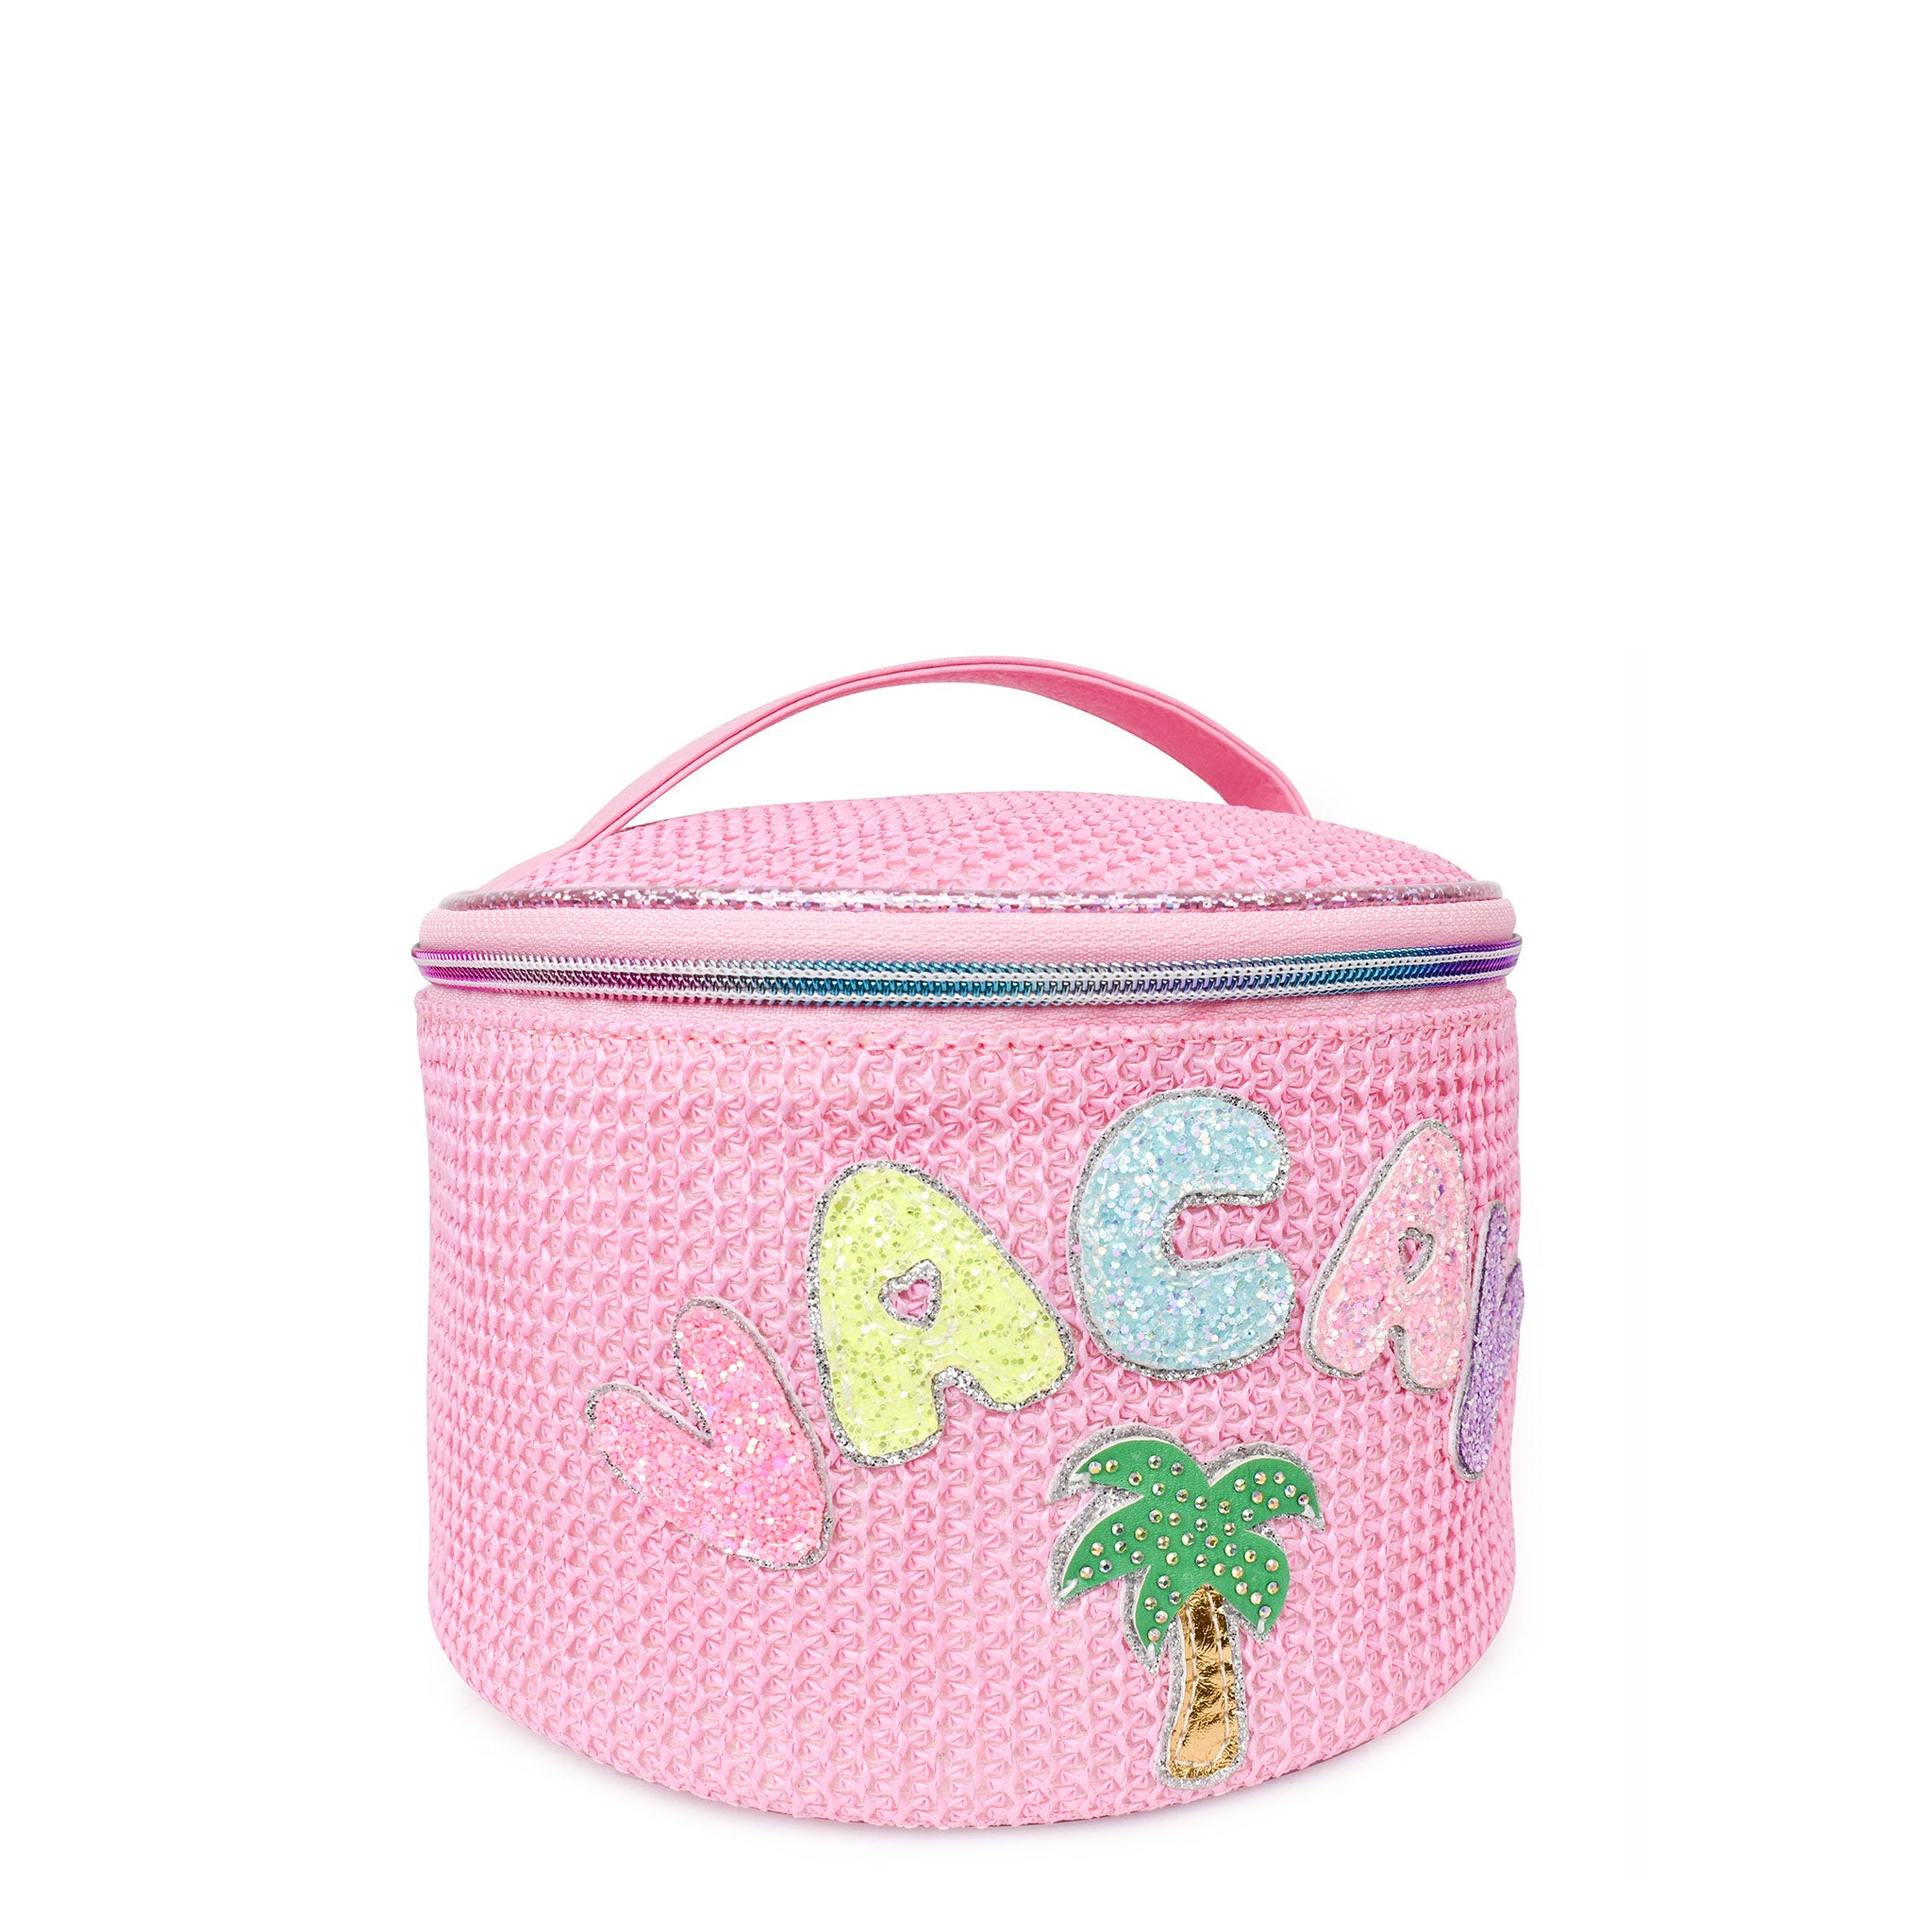 Side view of a pink straw round train case with glitter bubble letters 'VACAY' and palm tree appliqué